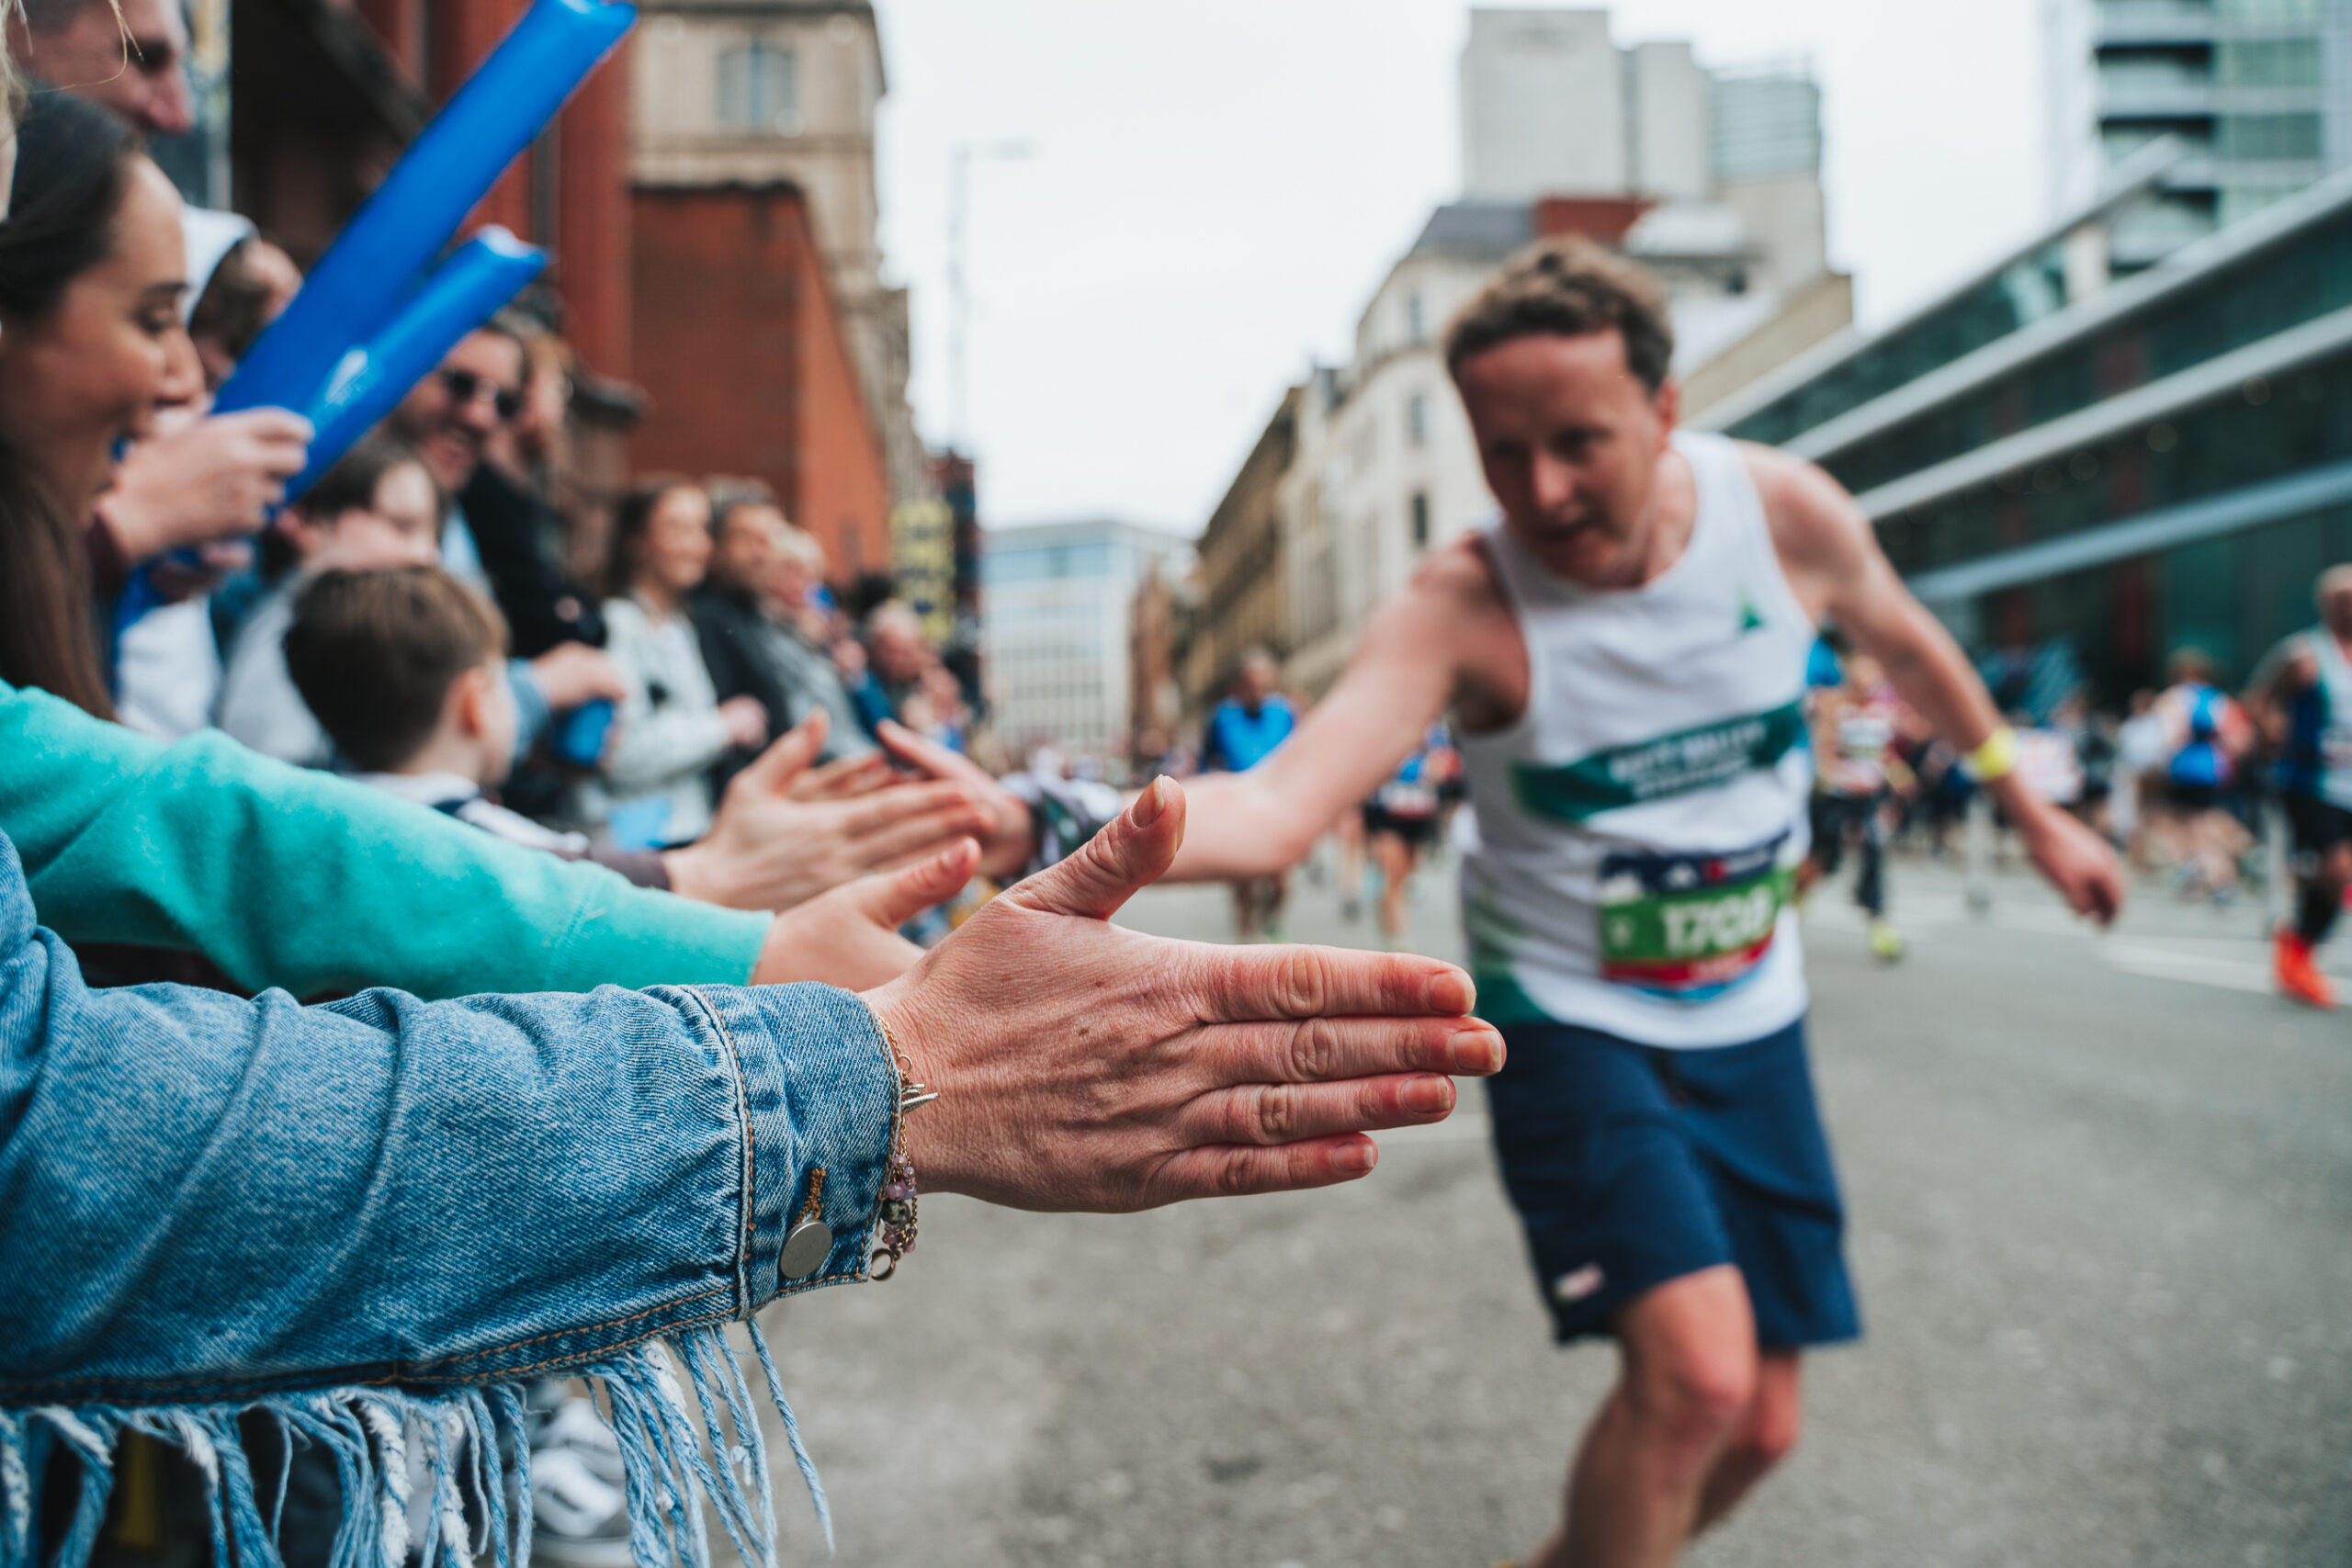 Entry into the 2024 adidas Manchester Marathon soars following a 'Super